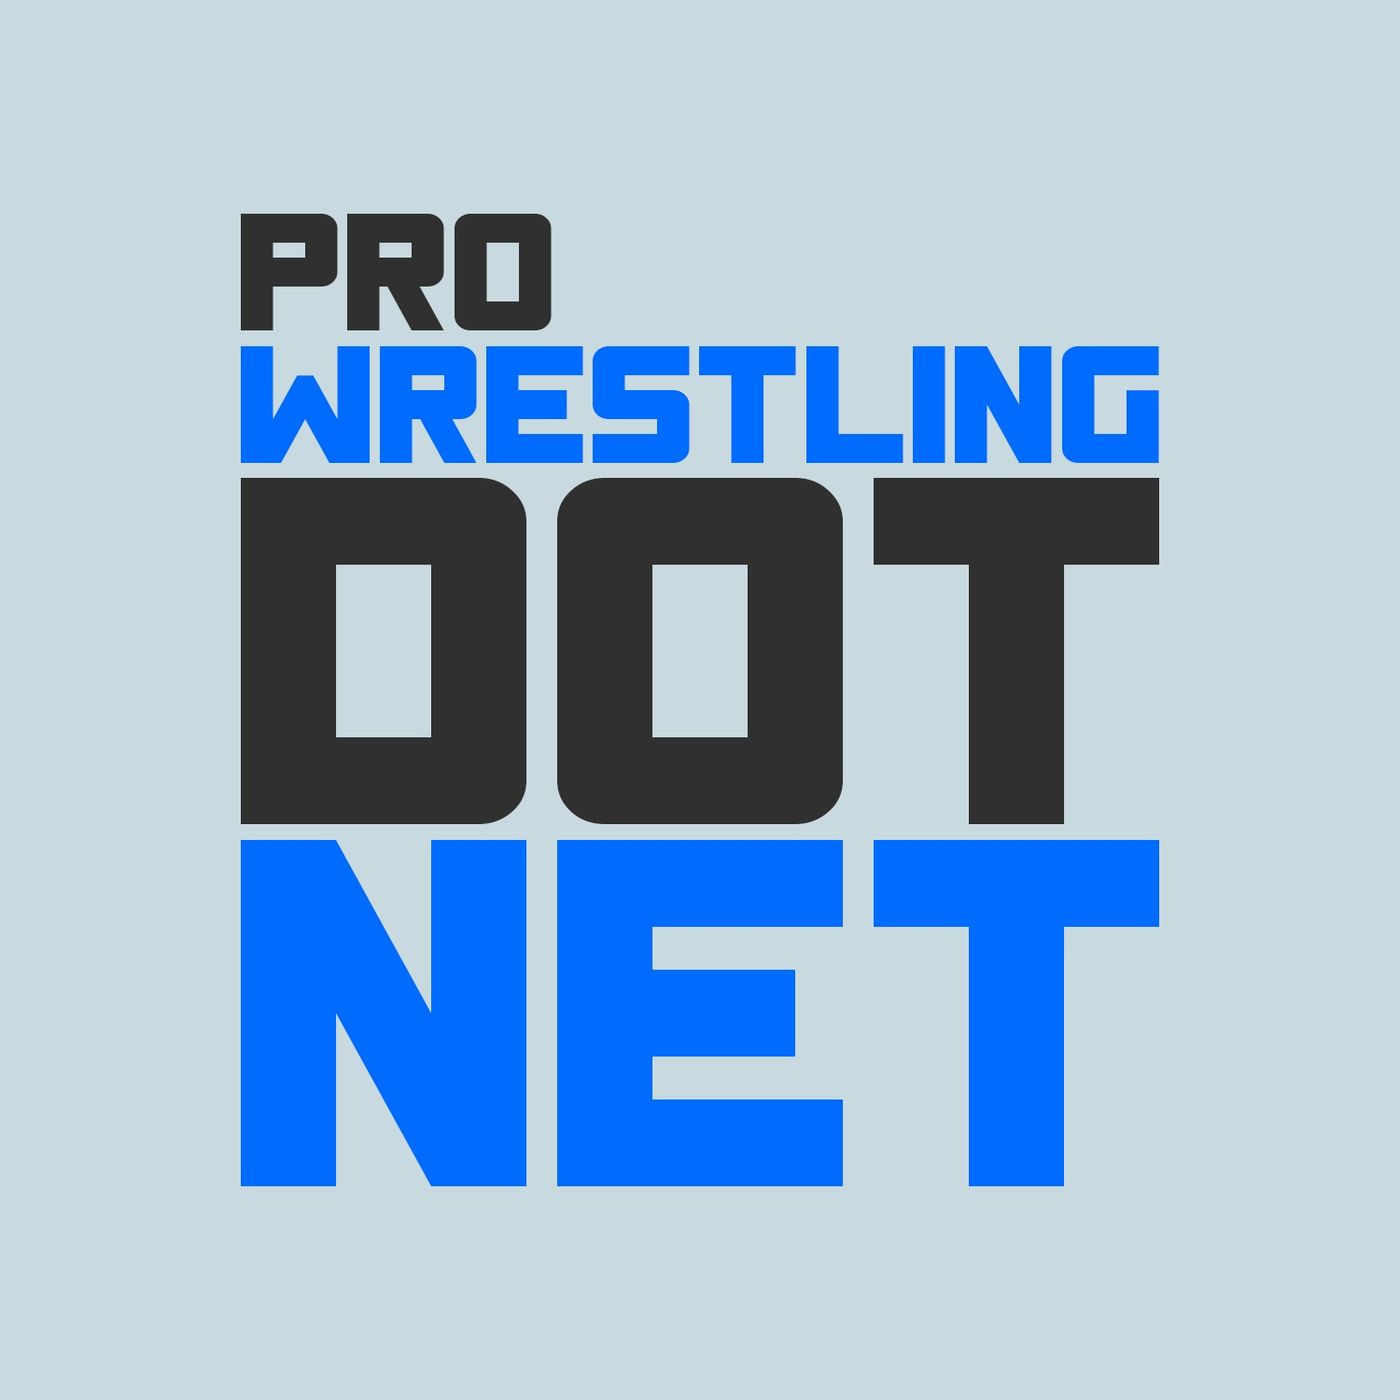 04/18 ProWrestling.net Free Podcast: AEW media call with Tony Khan discussing Sunday’s AEW Dynasty pay-per-view